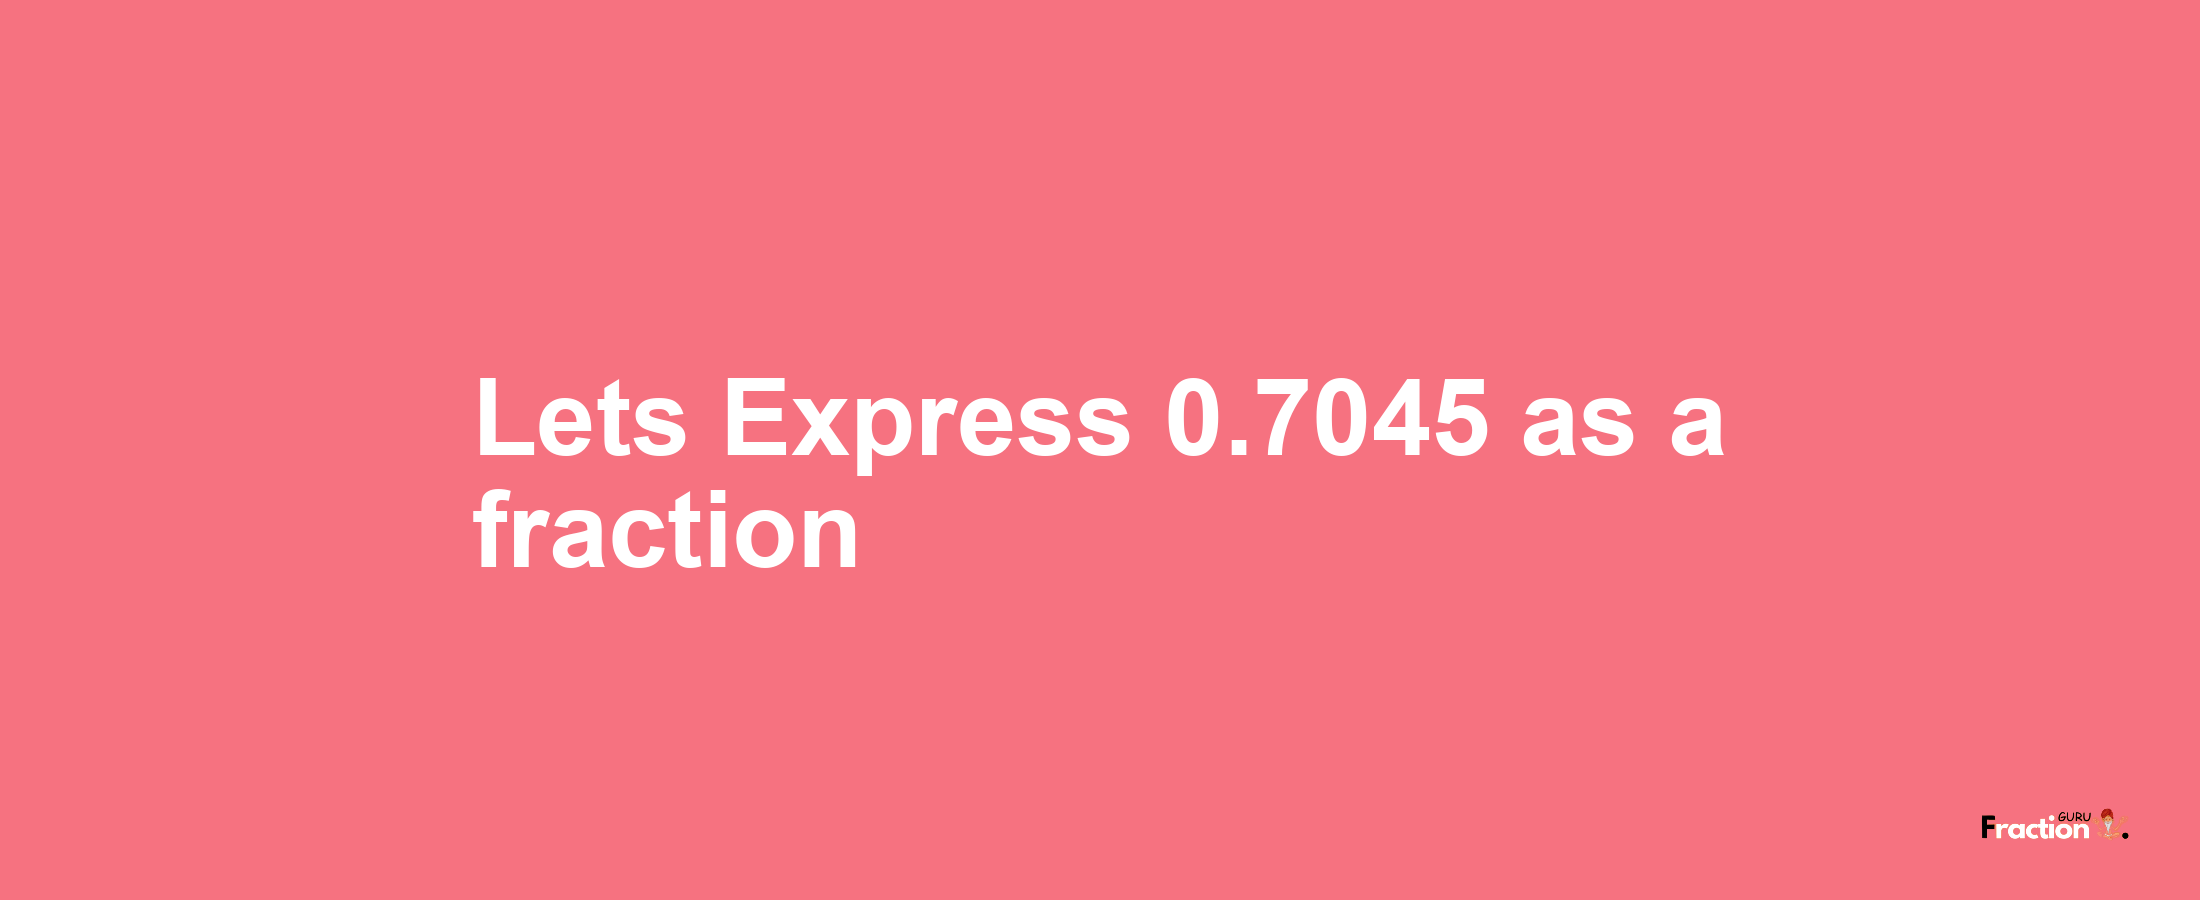 Lets Express 0.7045 as afraction